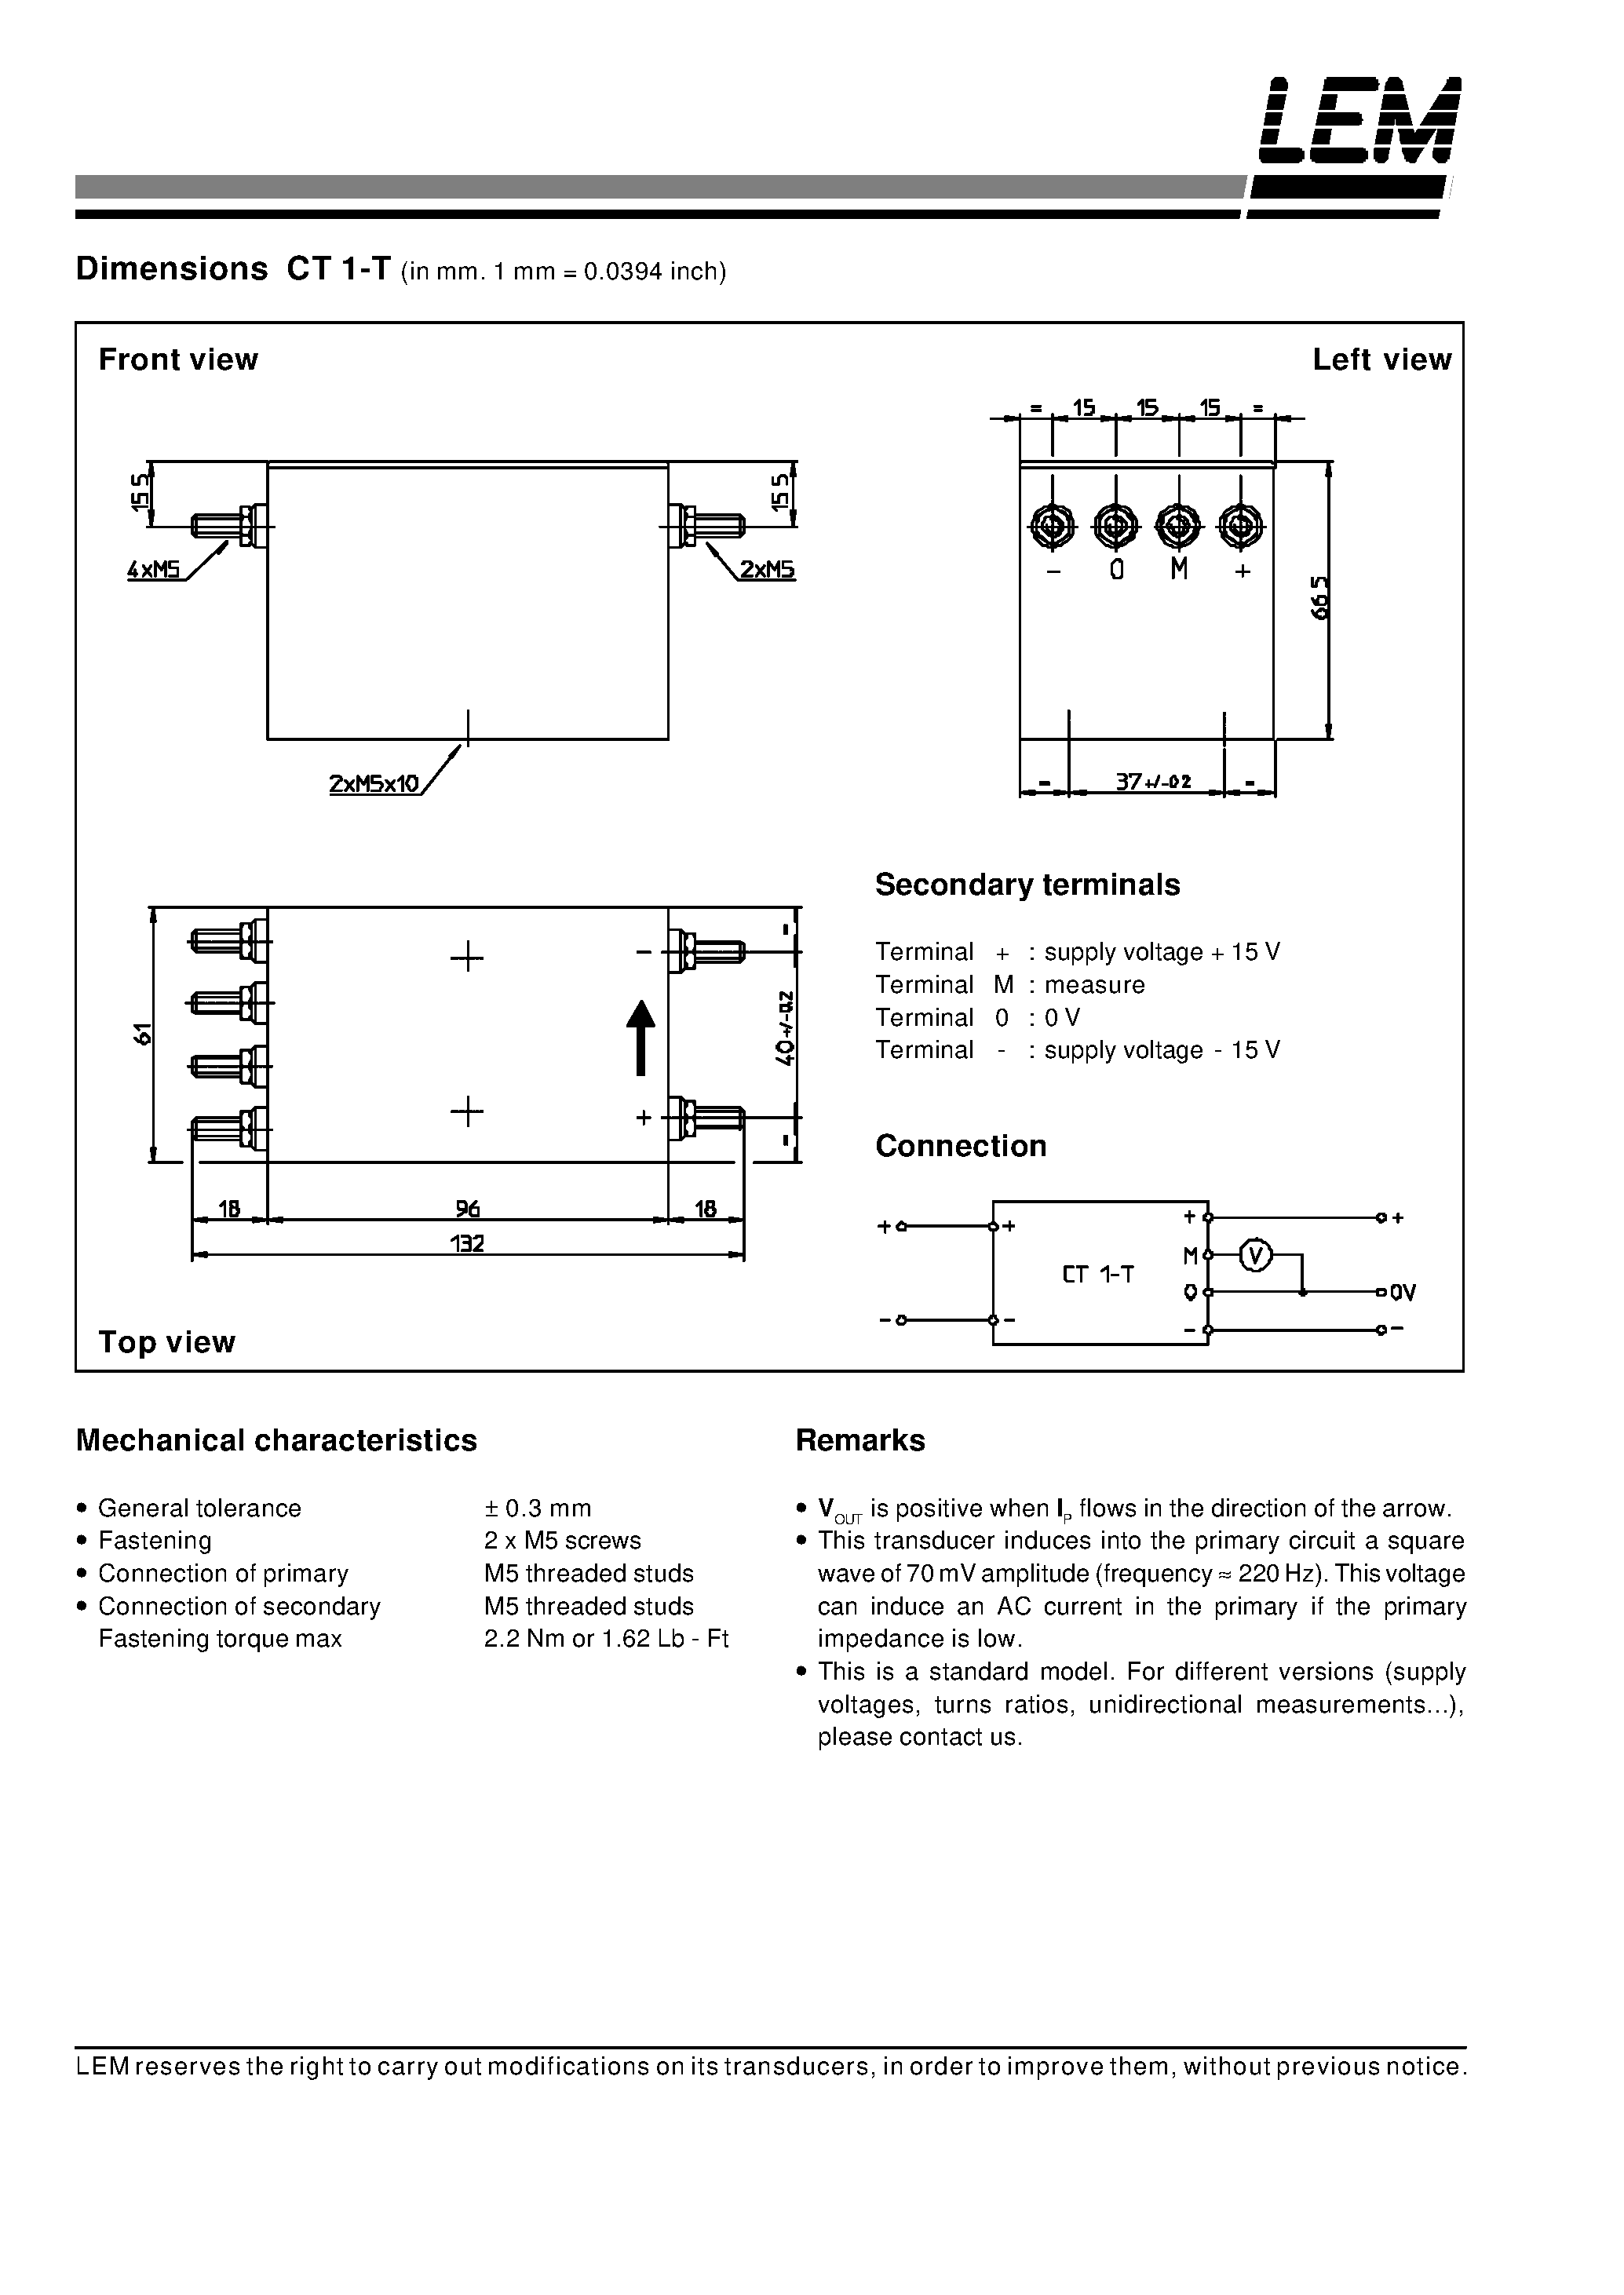 Datasheet CT1-T - Current Transducer page 2